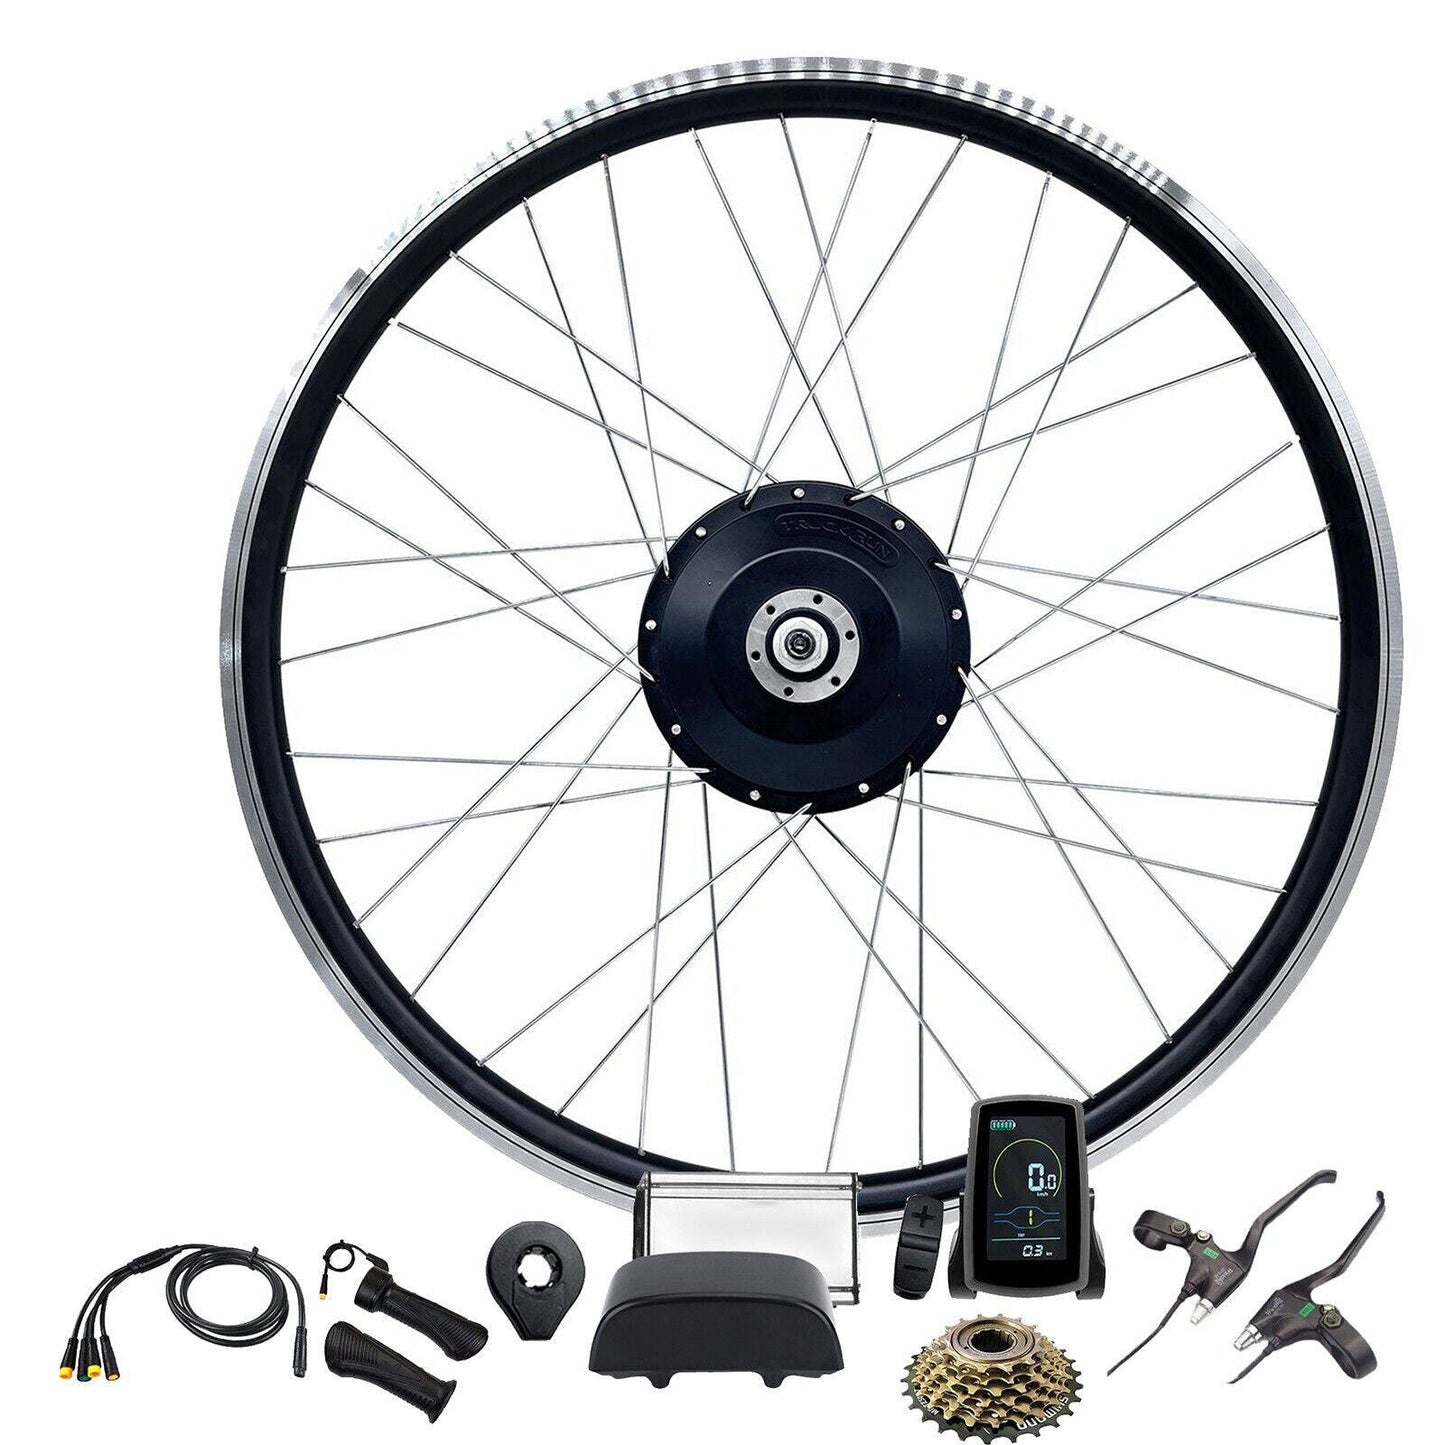 750W 27.5" Rear Hub 48V Electric Bike Conversion Kit (Battery & Charger Not Included) - TDRMOTO